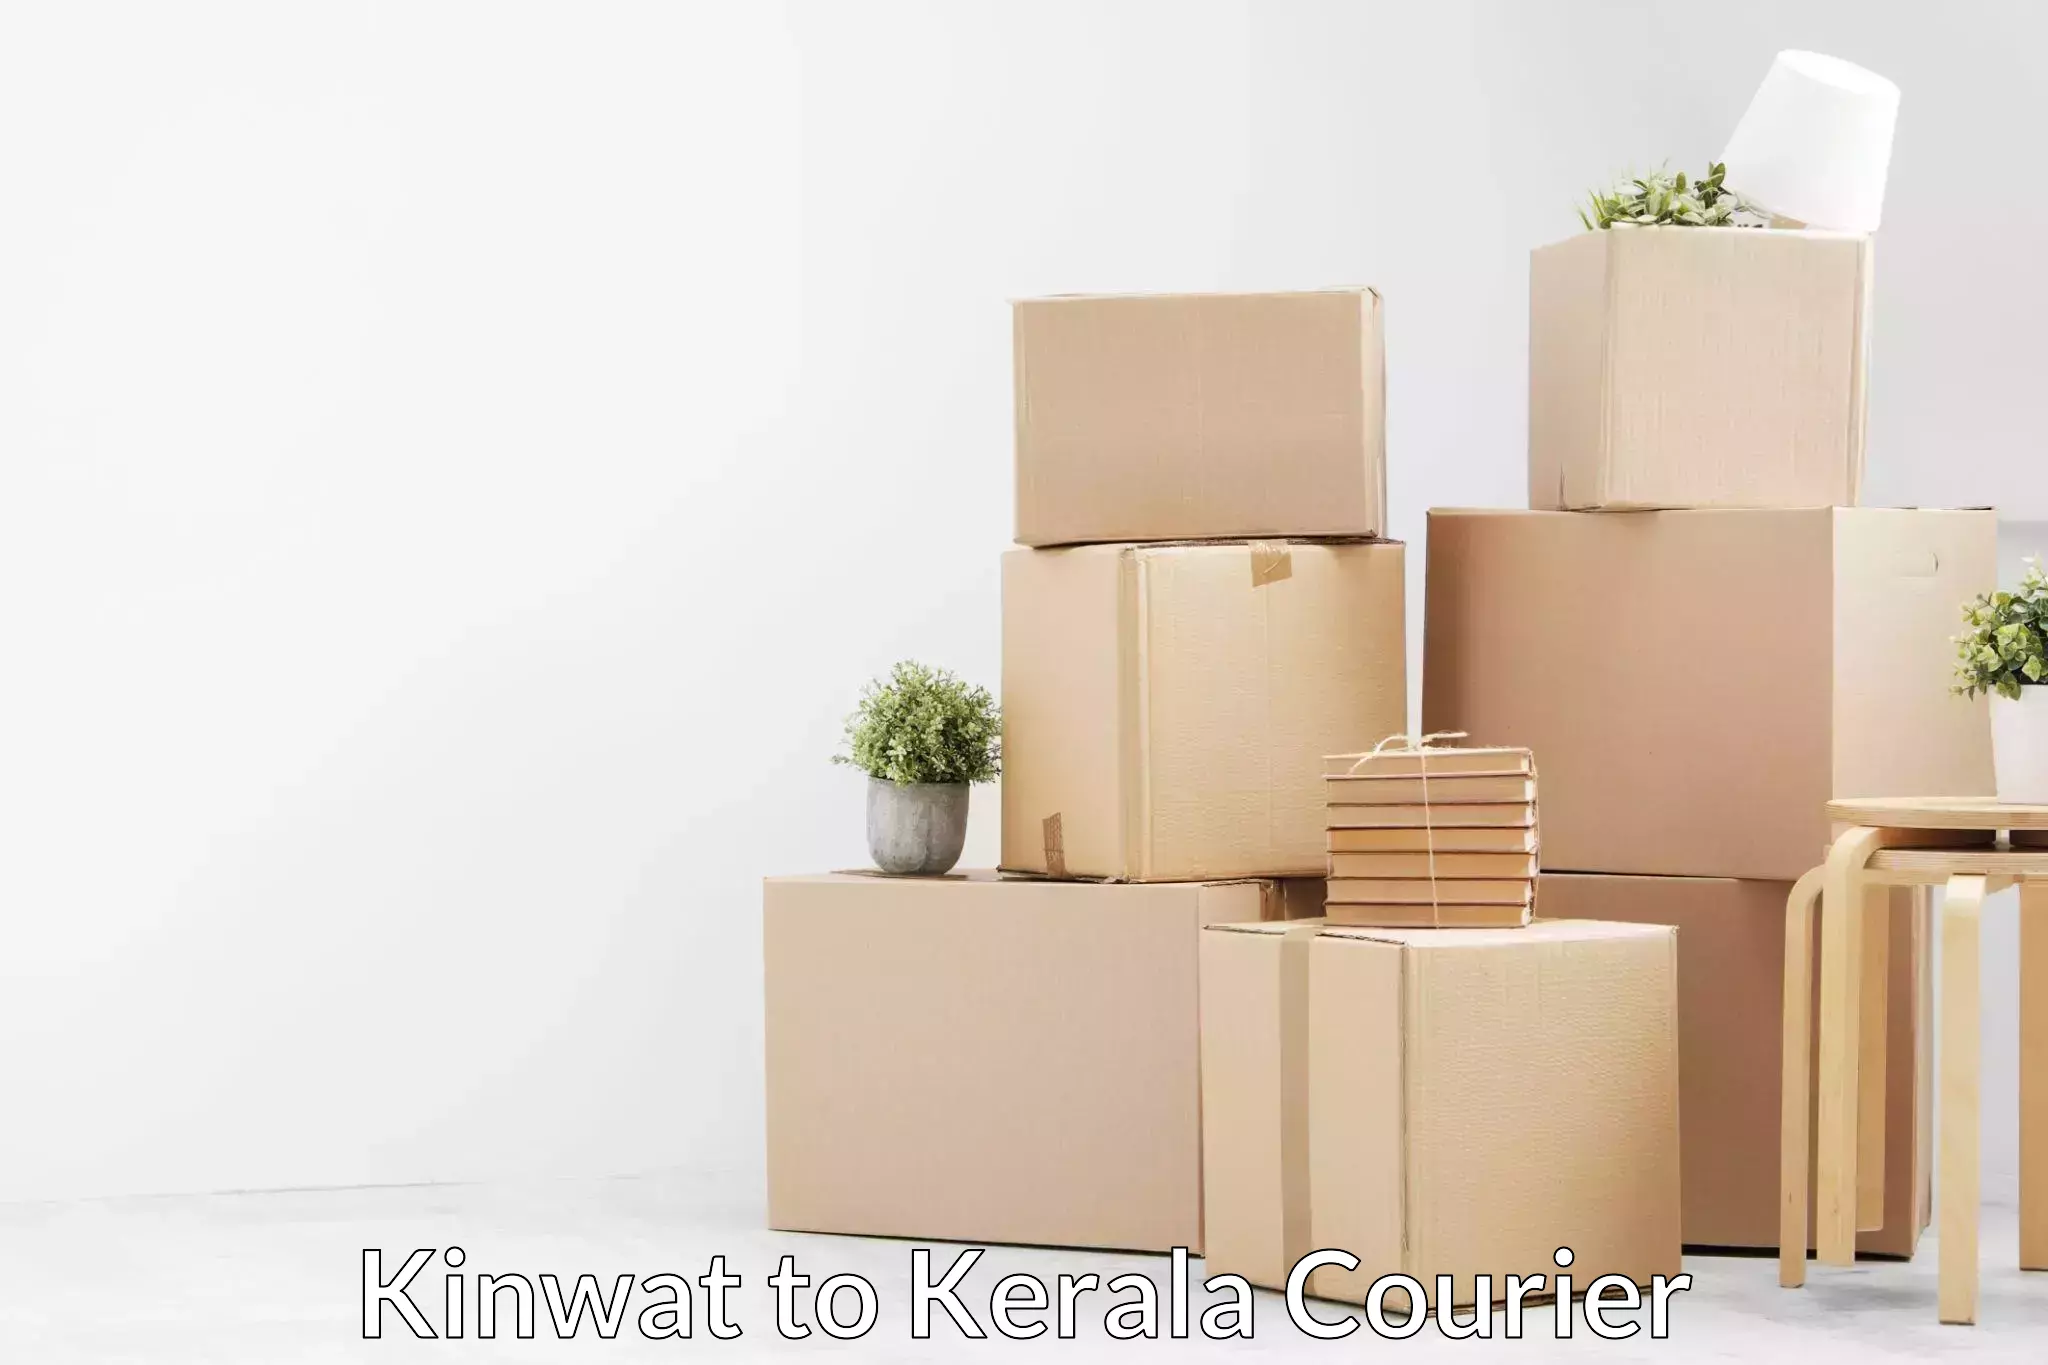 Trusted relocation experts Kinwat to Kerala